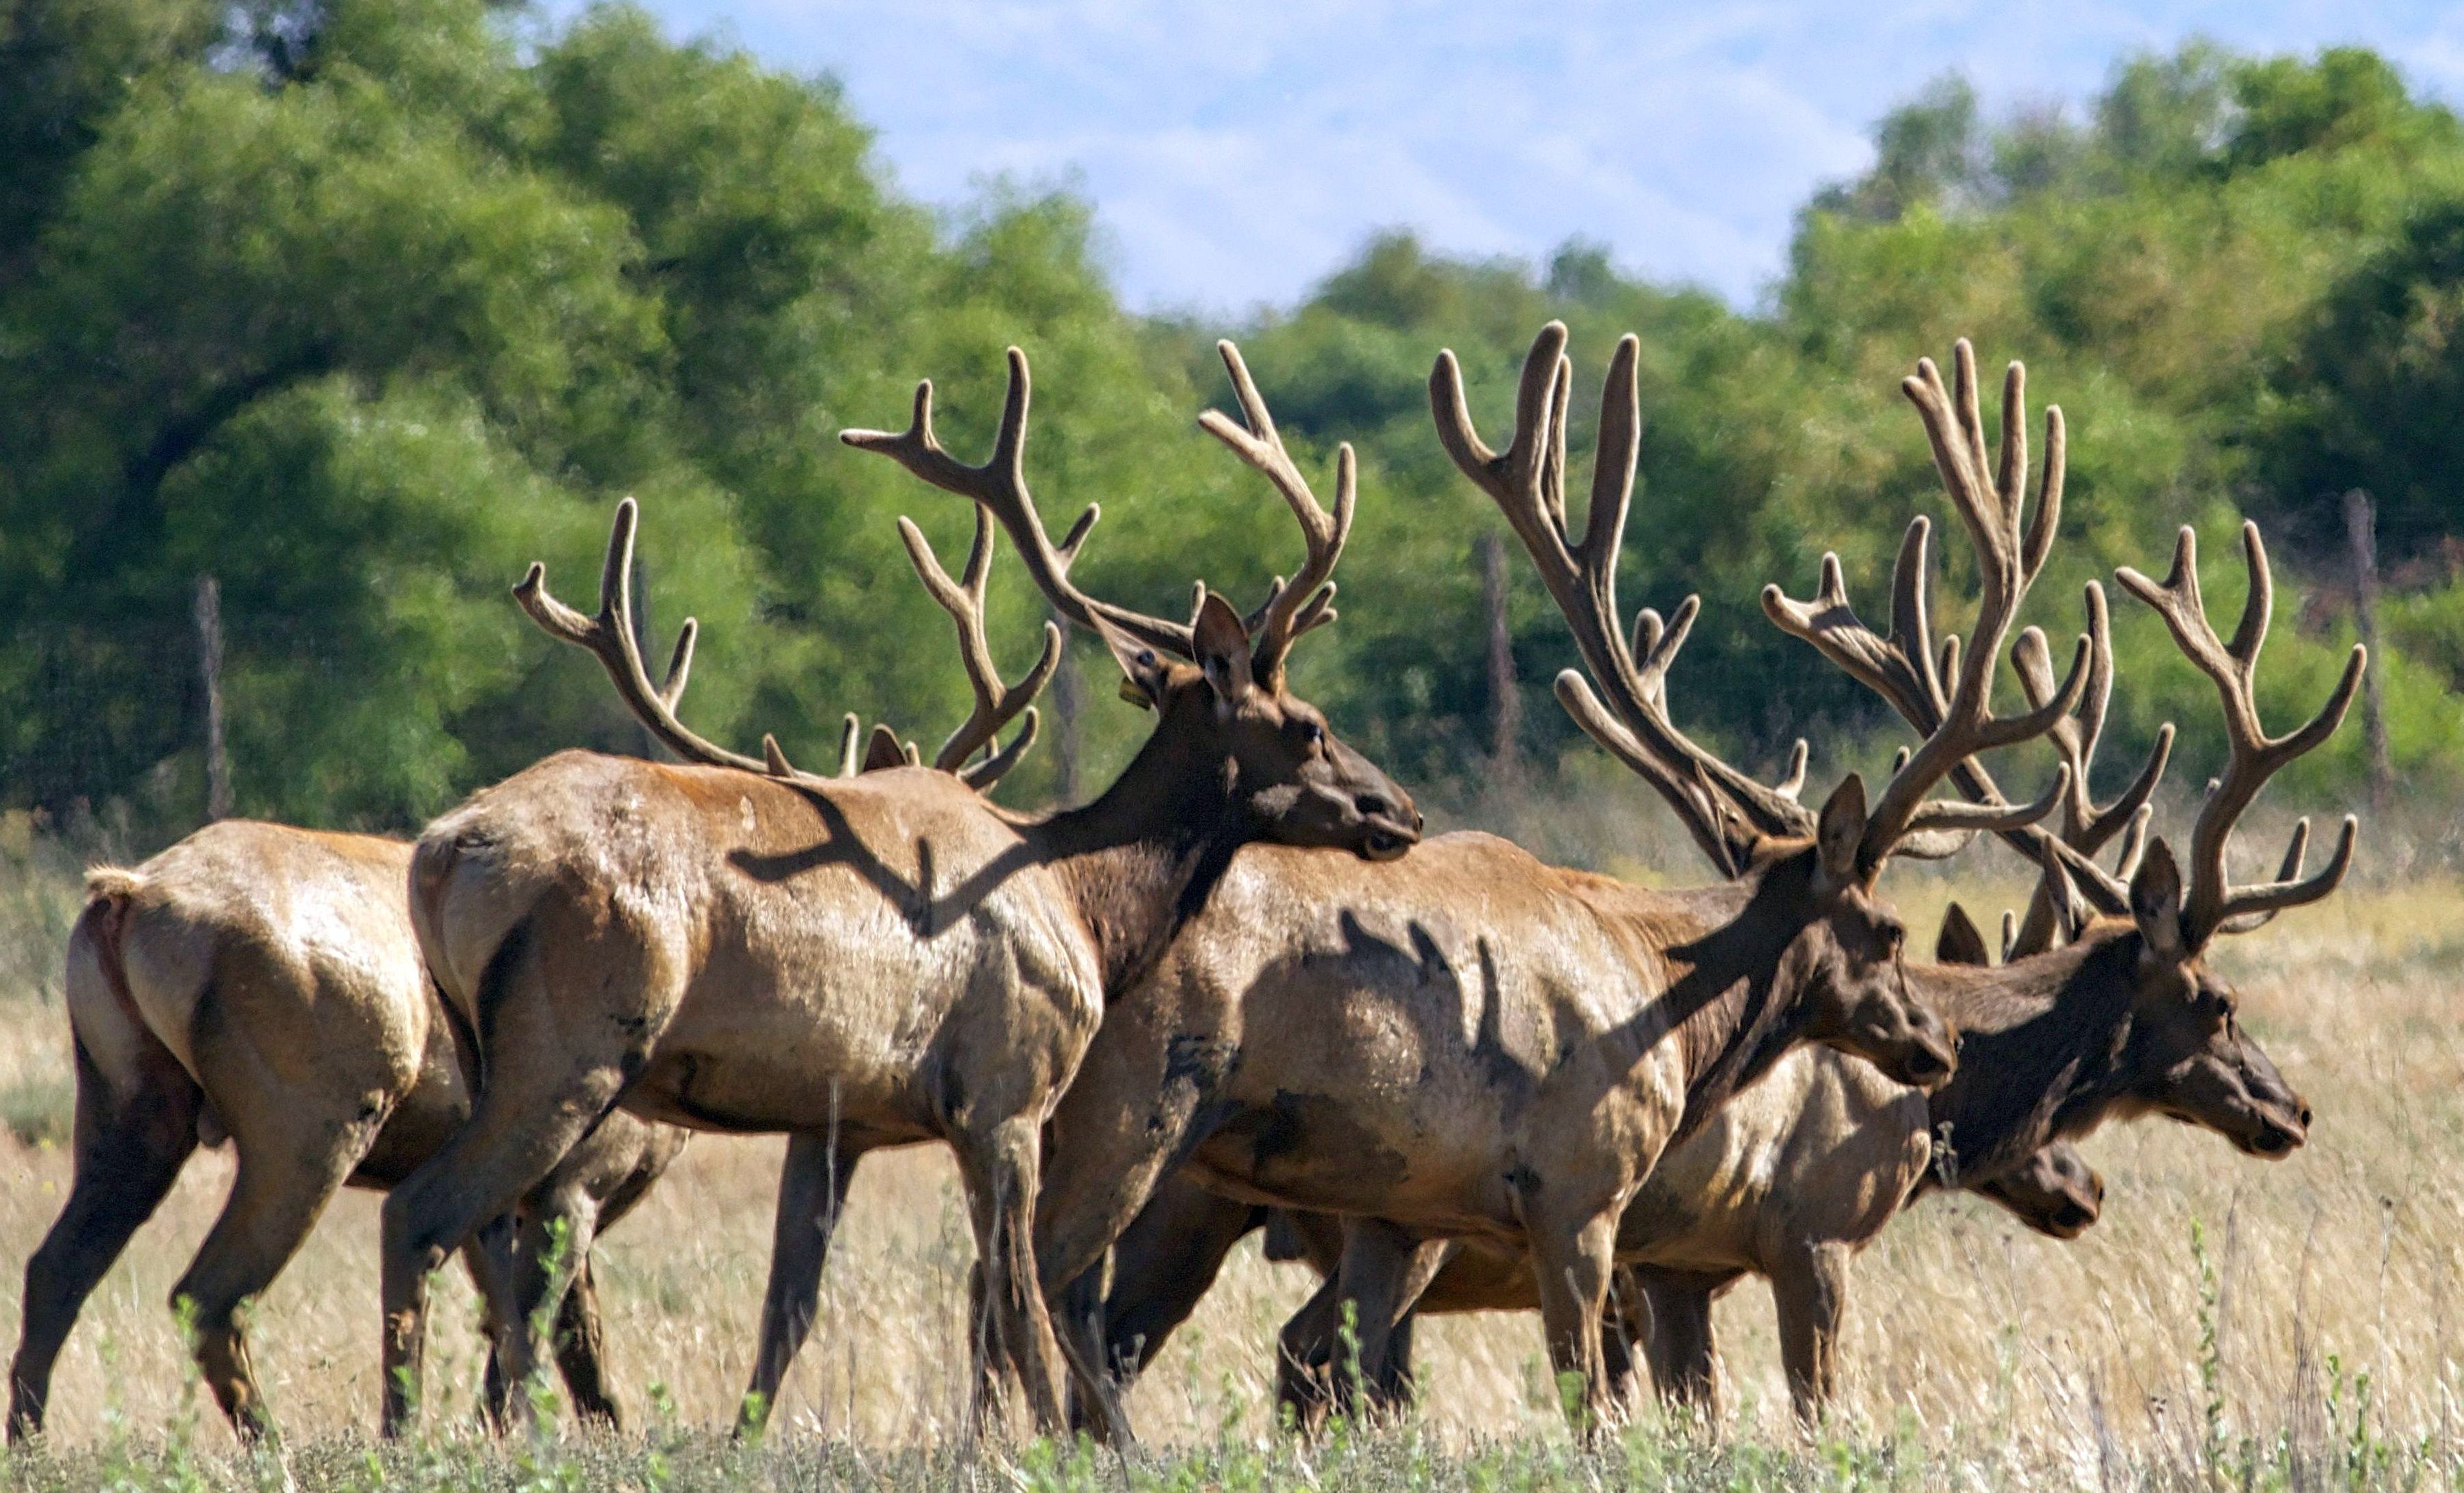 Several Tule elk stand bunched together in a brown grassy field with a green trees in the background